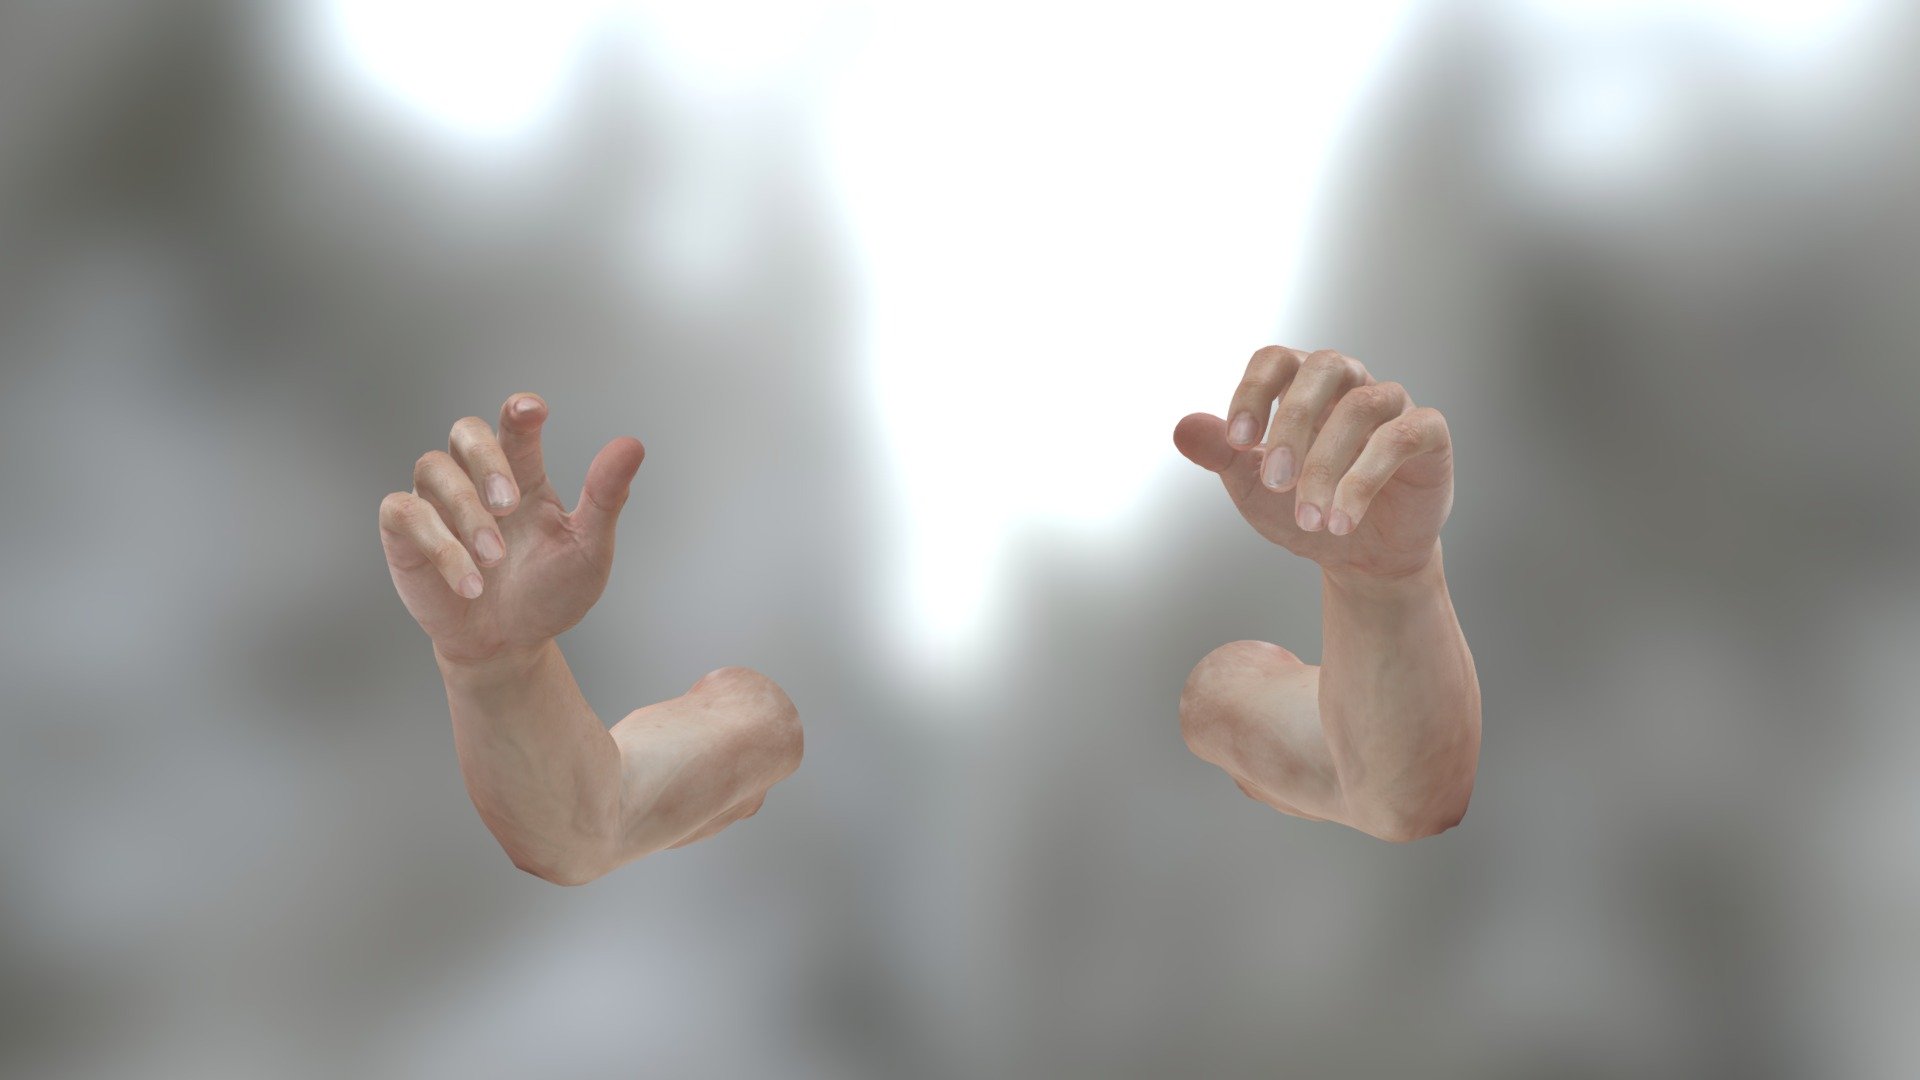 A “handy” set of assets for any modern first person game.   The Ironbelly Studios First Person Arms pack is available for purchase and comes with fully rigged and animated sets of three types of arms. These are the bare male arms, and each arm pair has three included skin tones (Light, Medium, and Dark). Each female pair has five nail polish options. Additionally, we have included military fatigues and fingerless gloves with two camo textures, which are compatible with both male and female arm models. The First Person Arm Pack is perfect for customization into any first or third person product!  https://www.ironbellystudios.com/shop - [Animation] First Person Arms, Male - 3D model by Ironbelly Studios (@ironbelly) 3d model